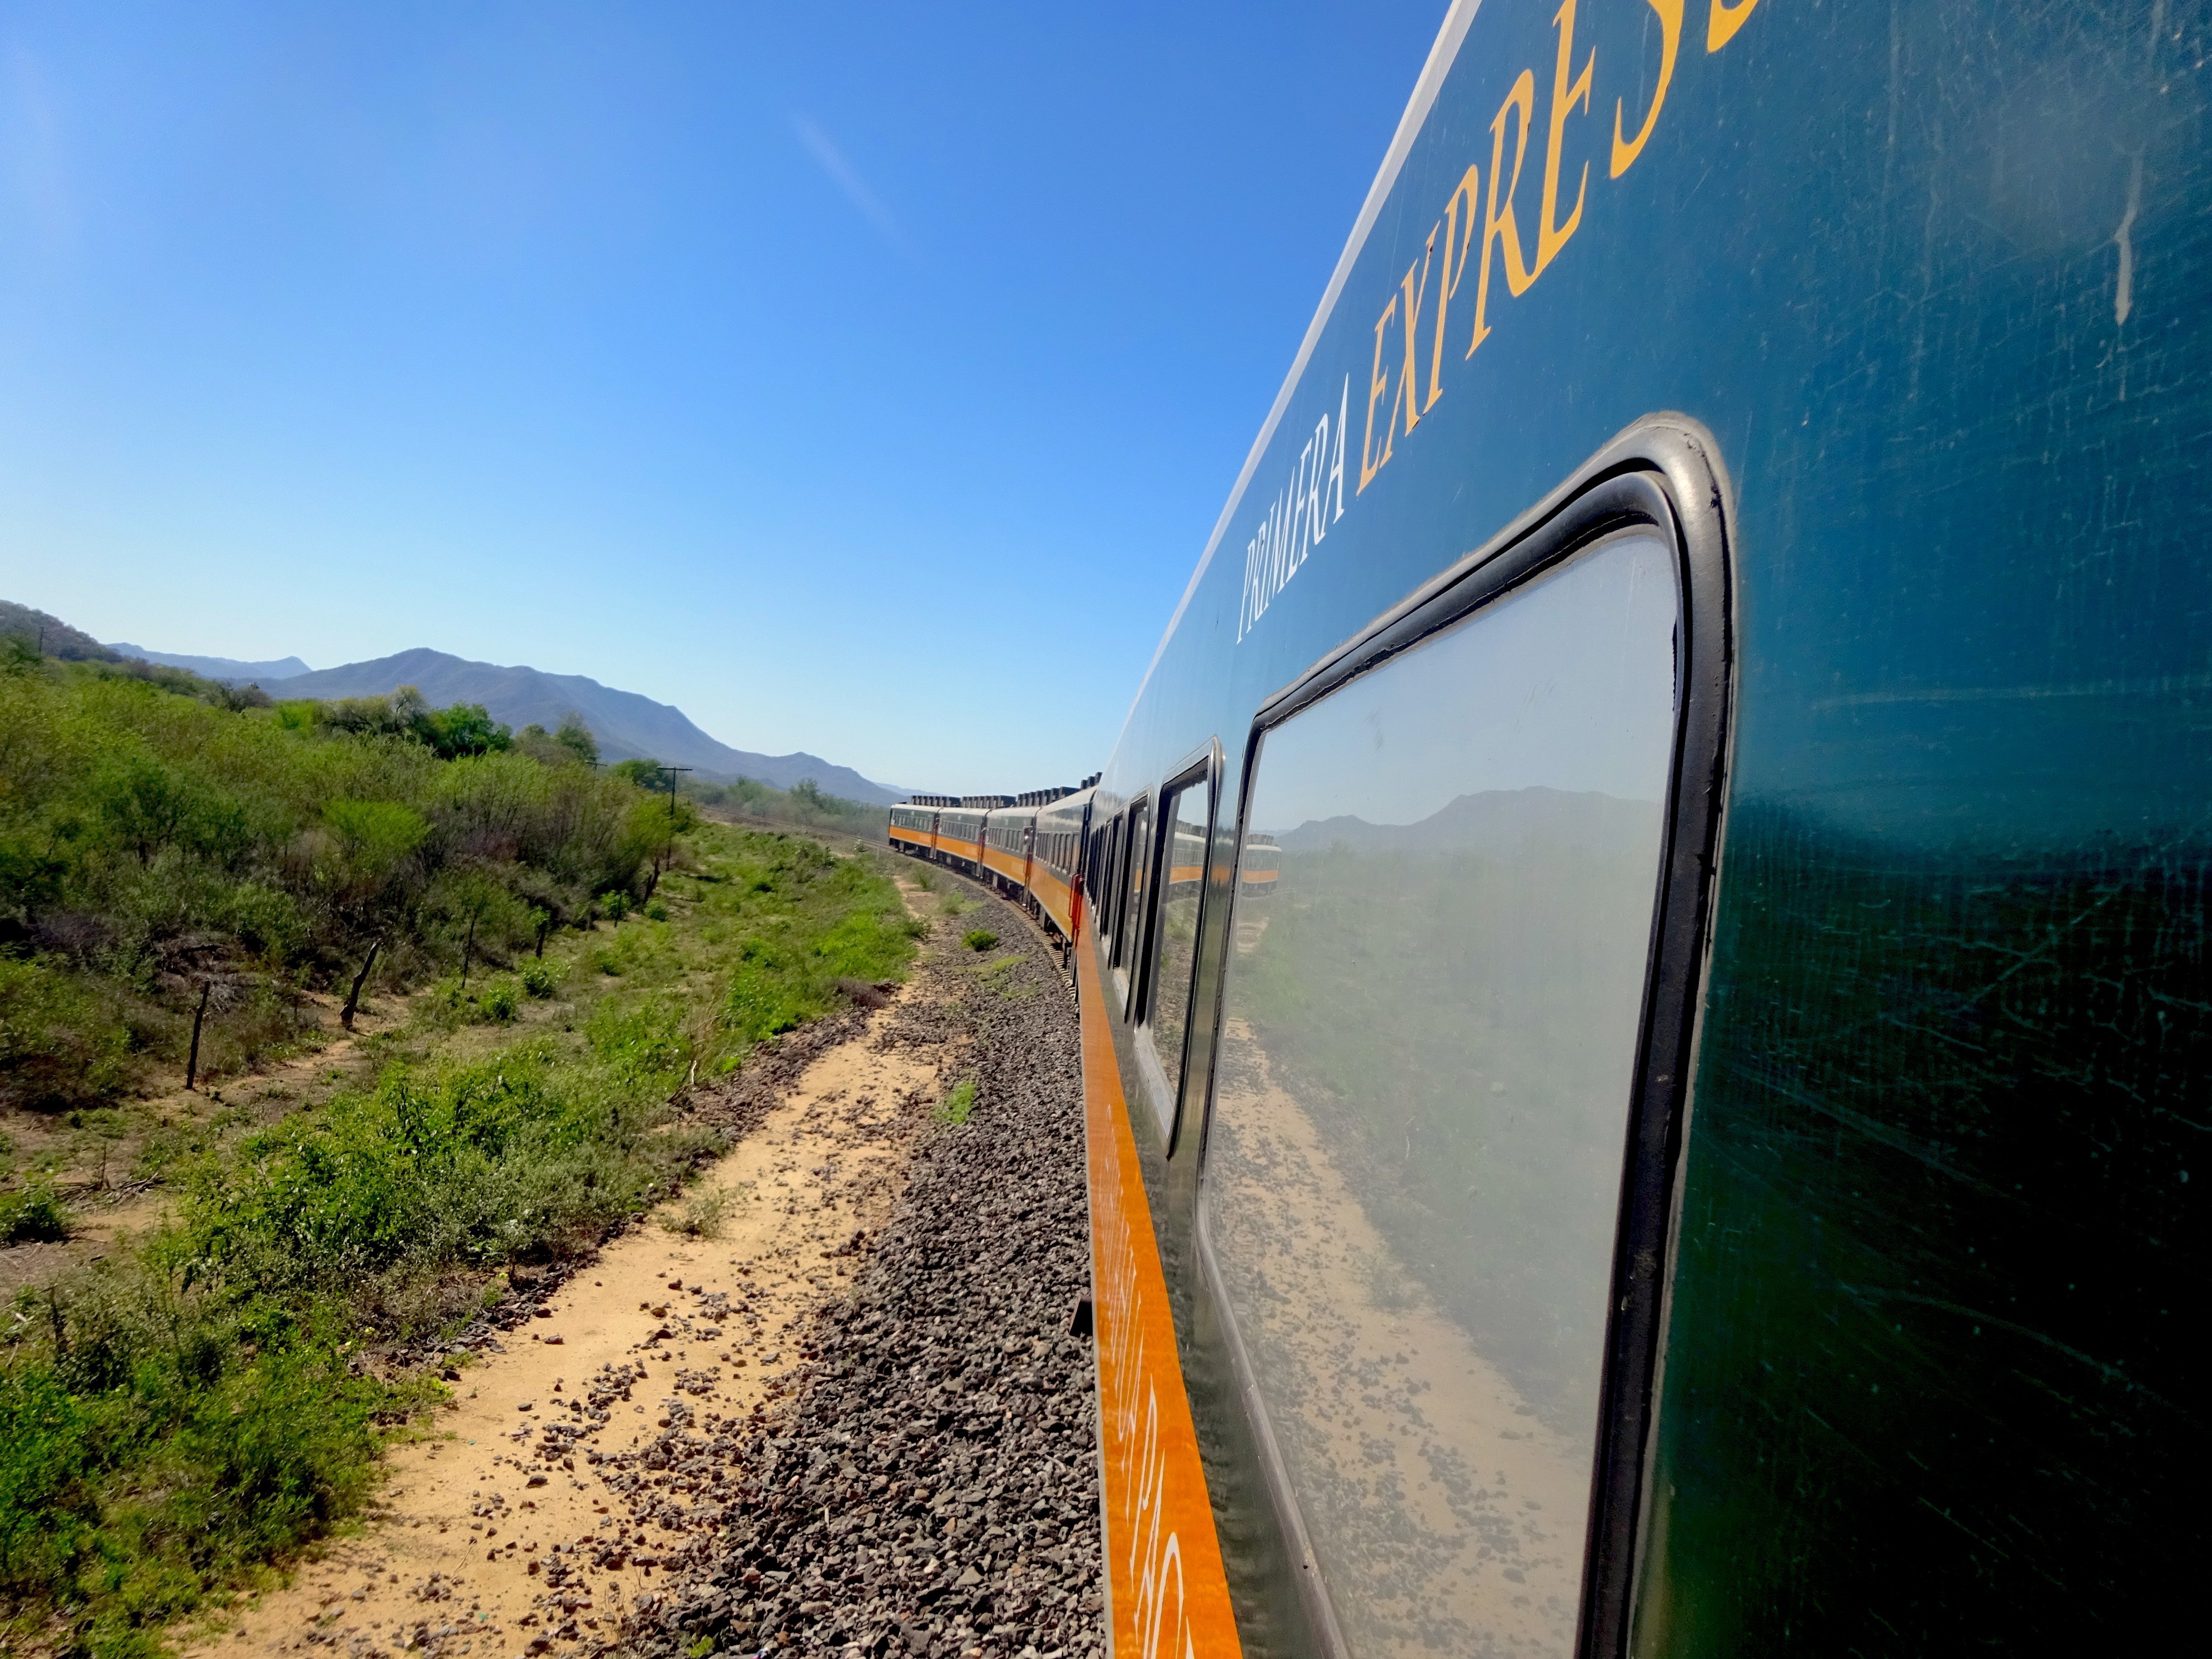 The Copper Canyon Railroad Natpacker